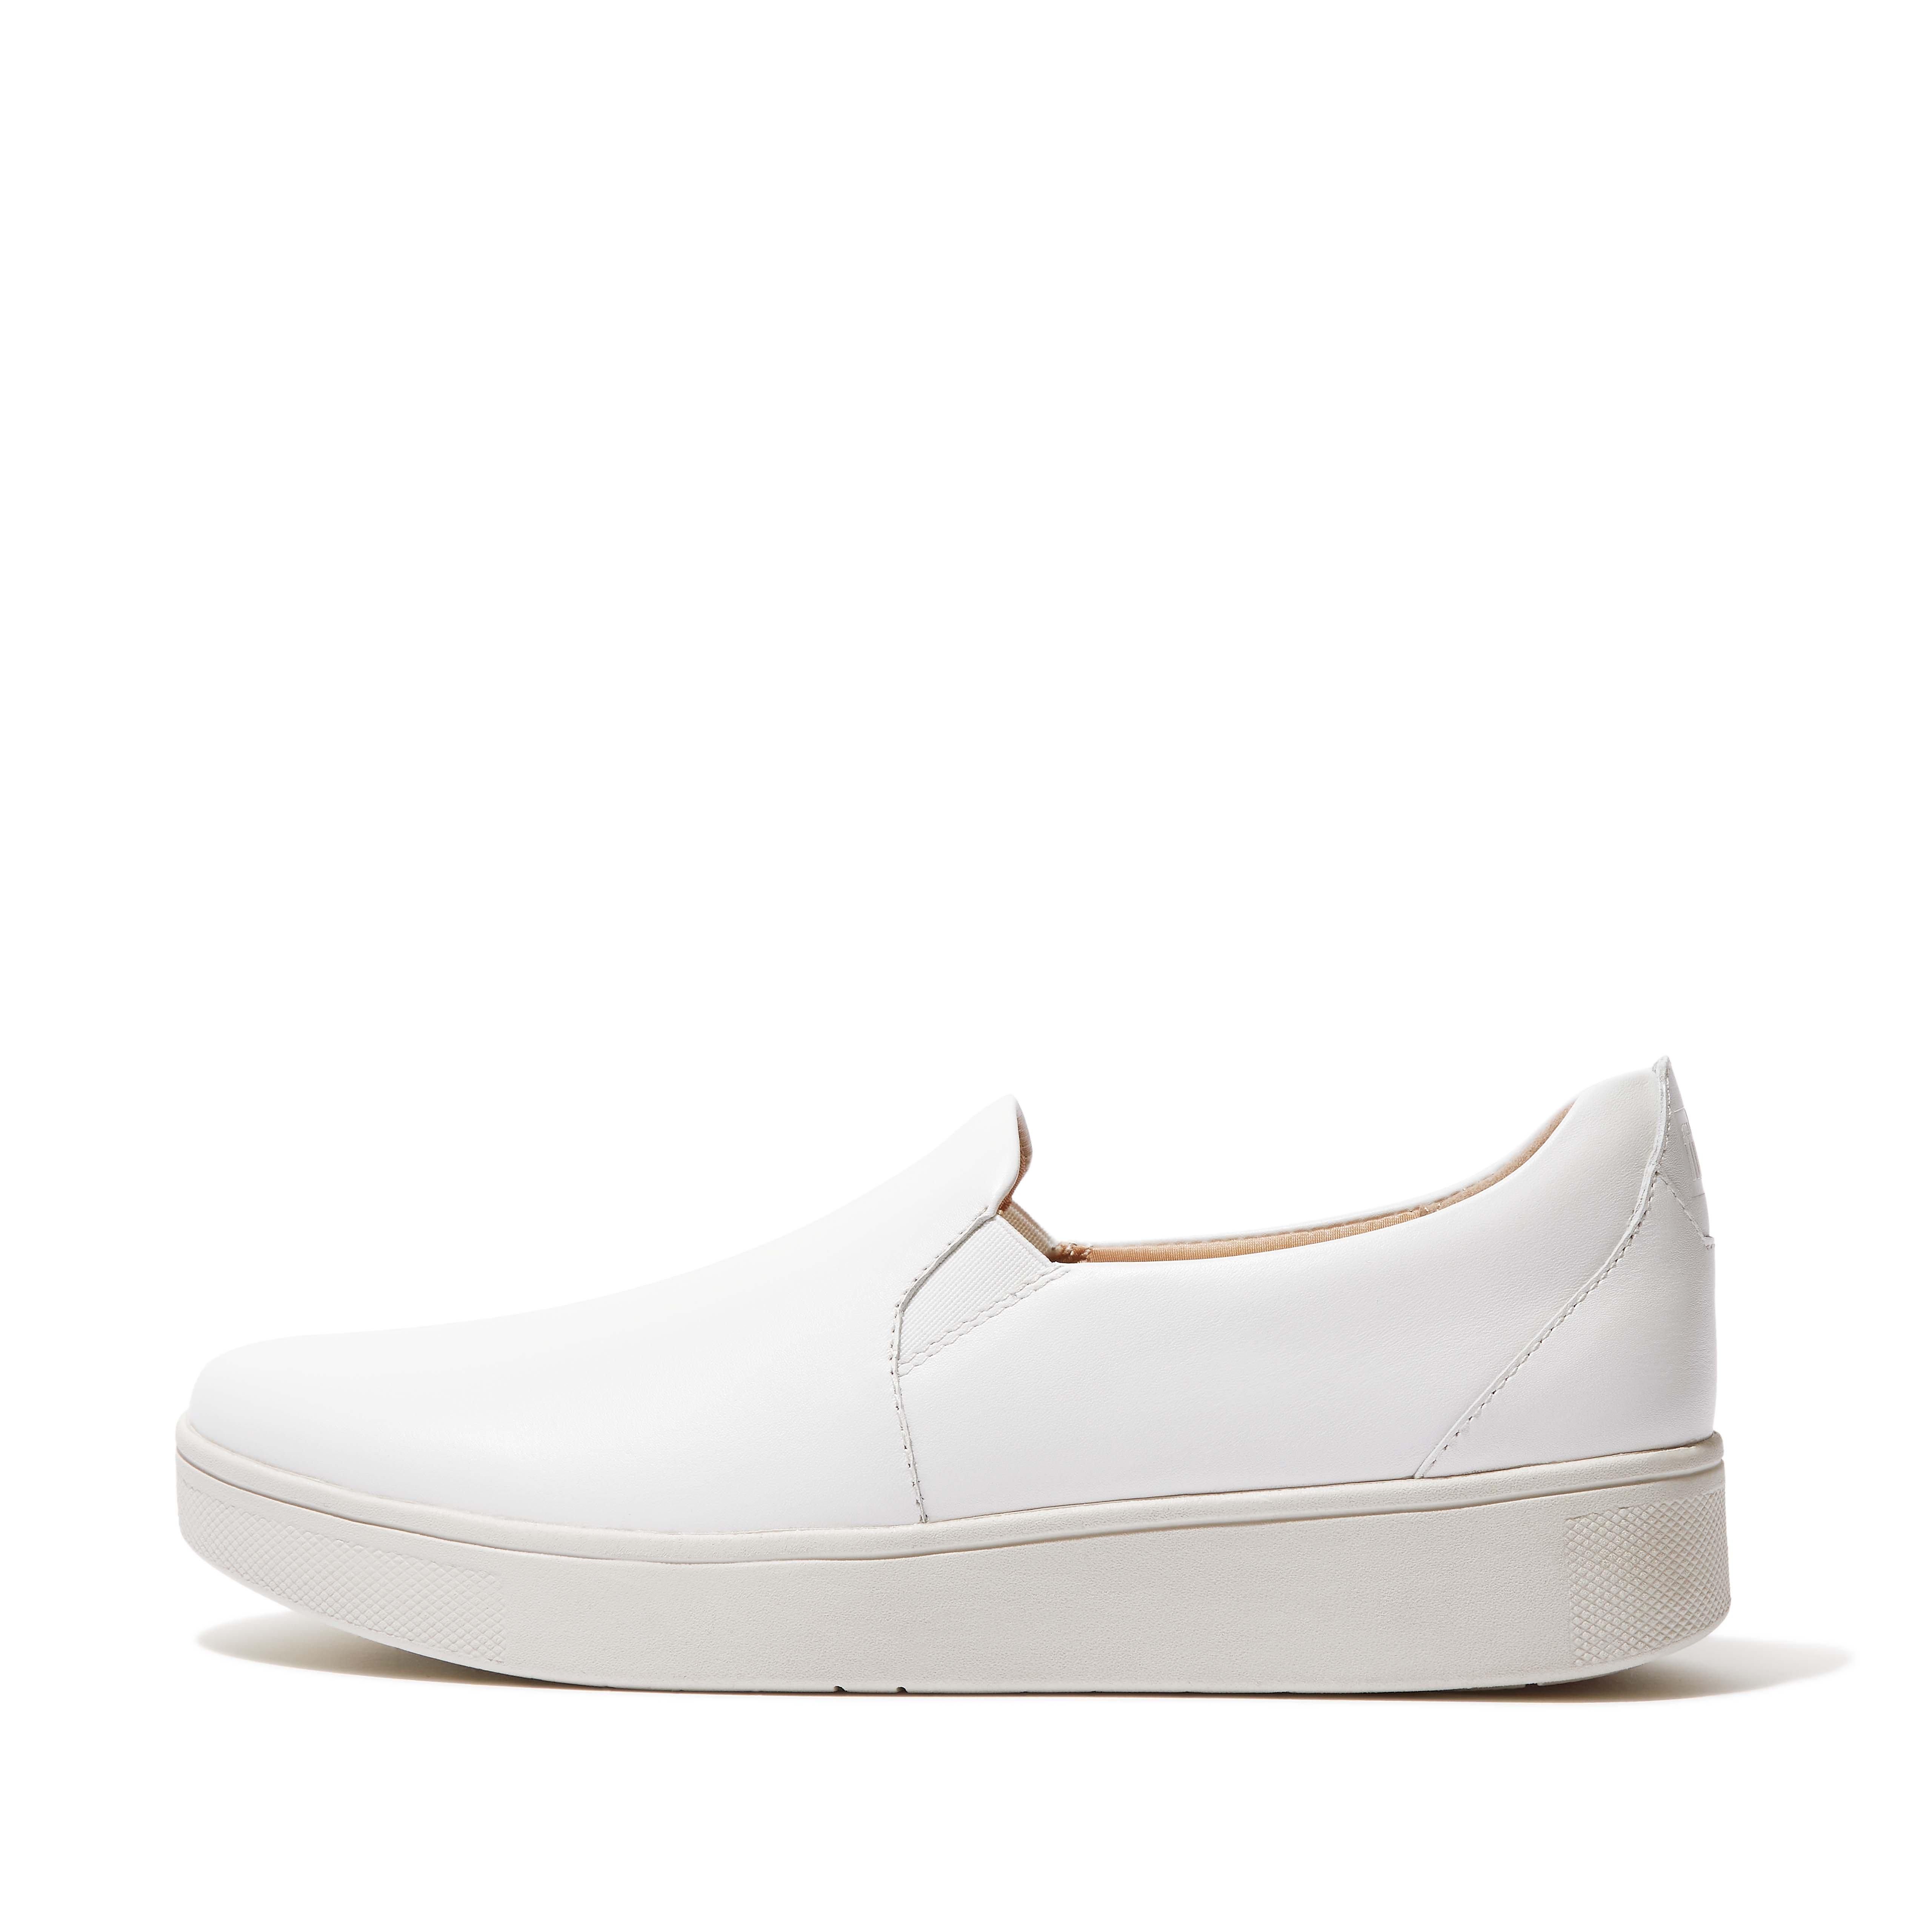 Fitflop Leather Slip-On Skate Sneakers